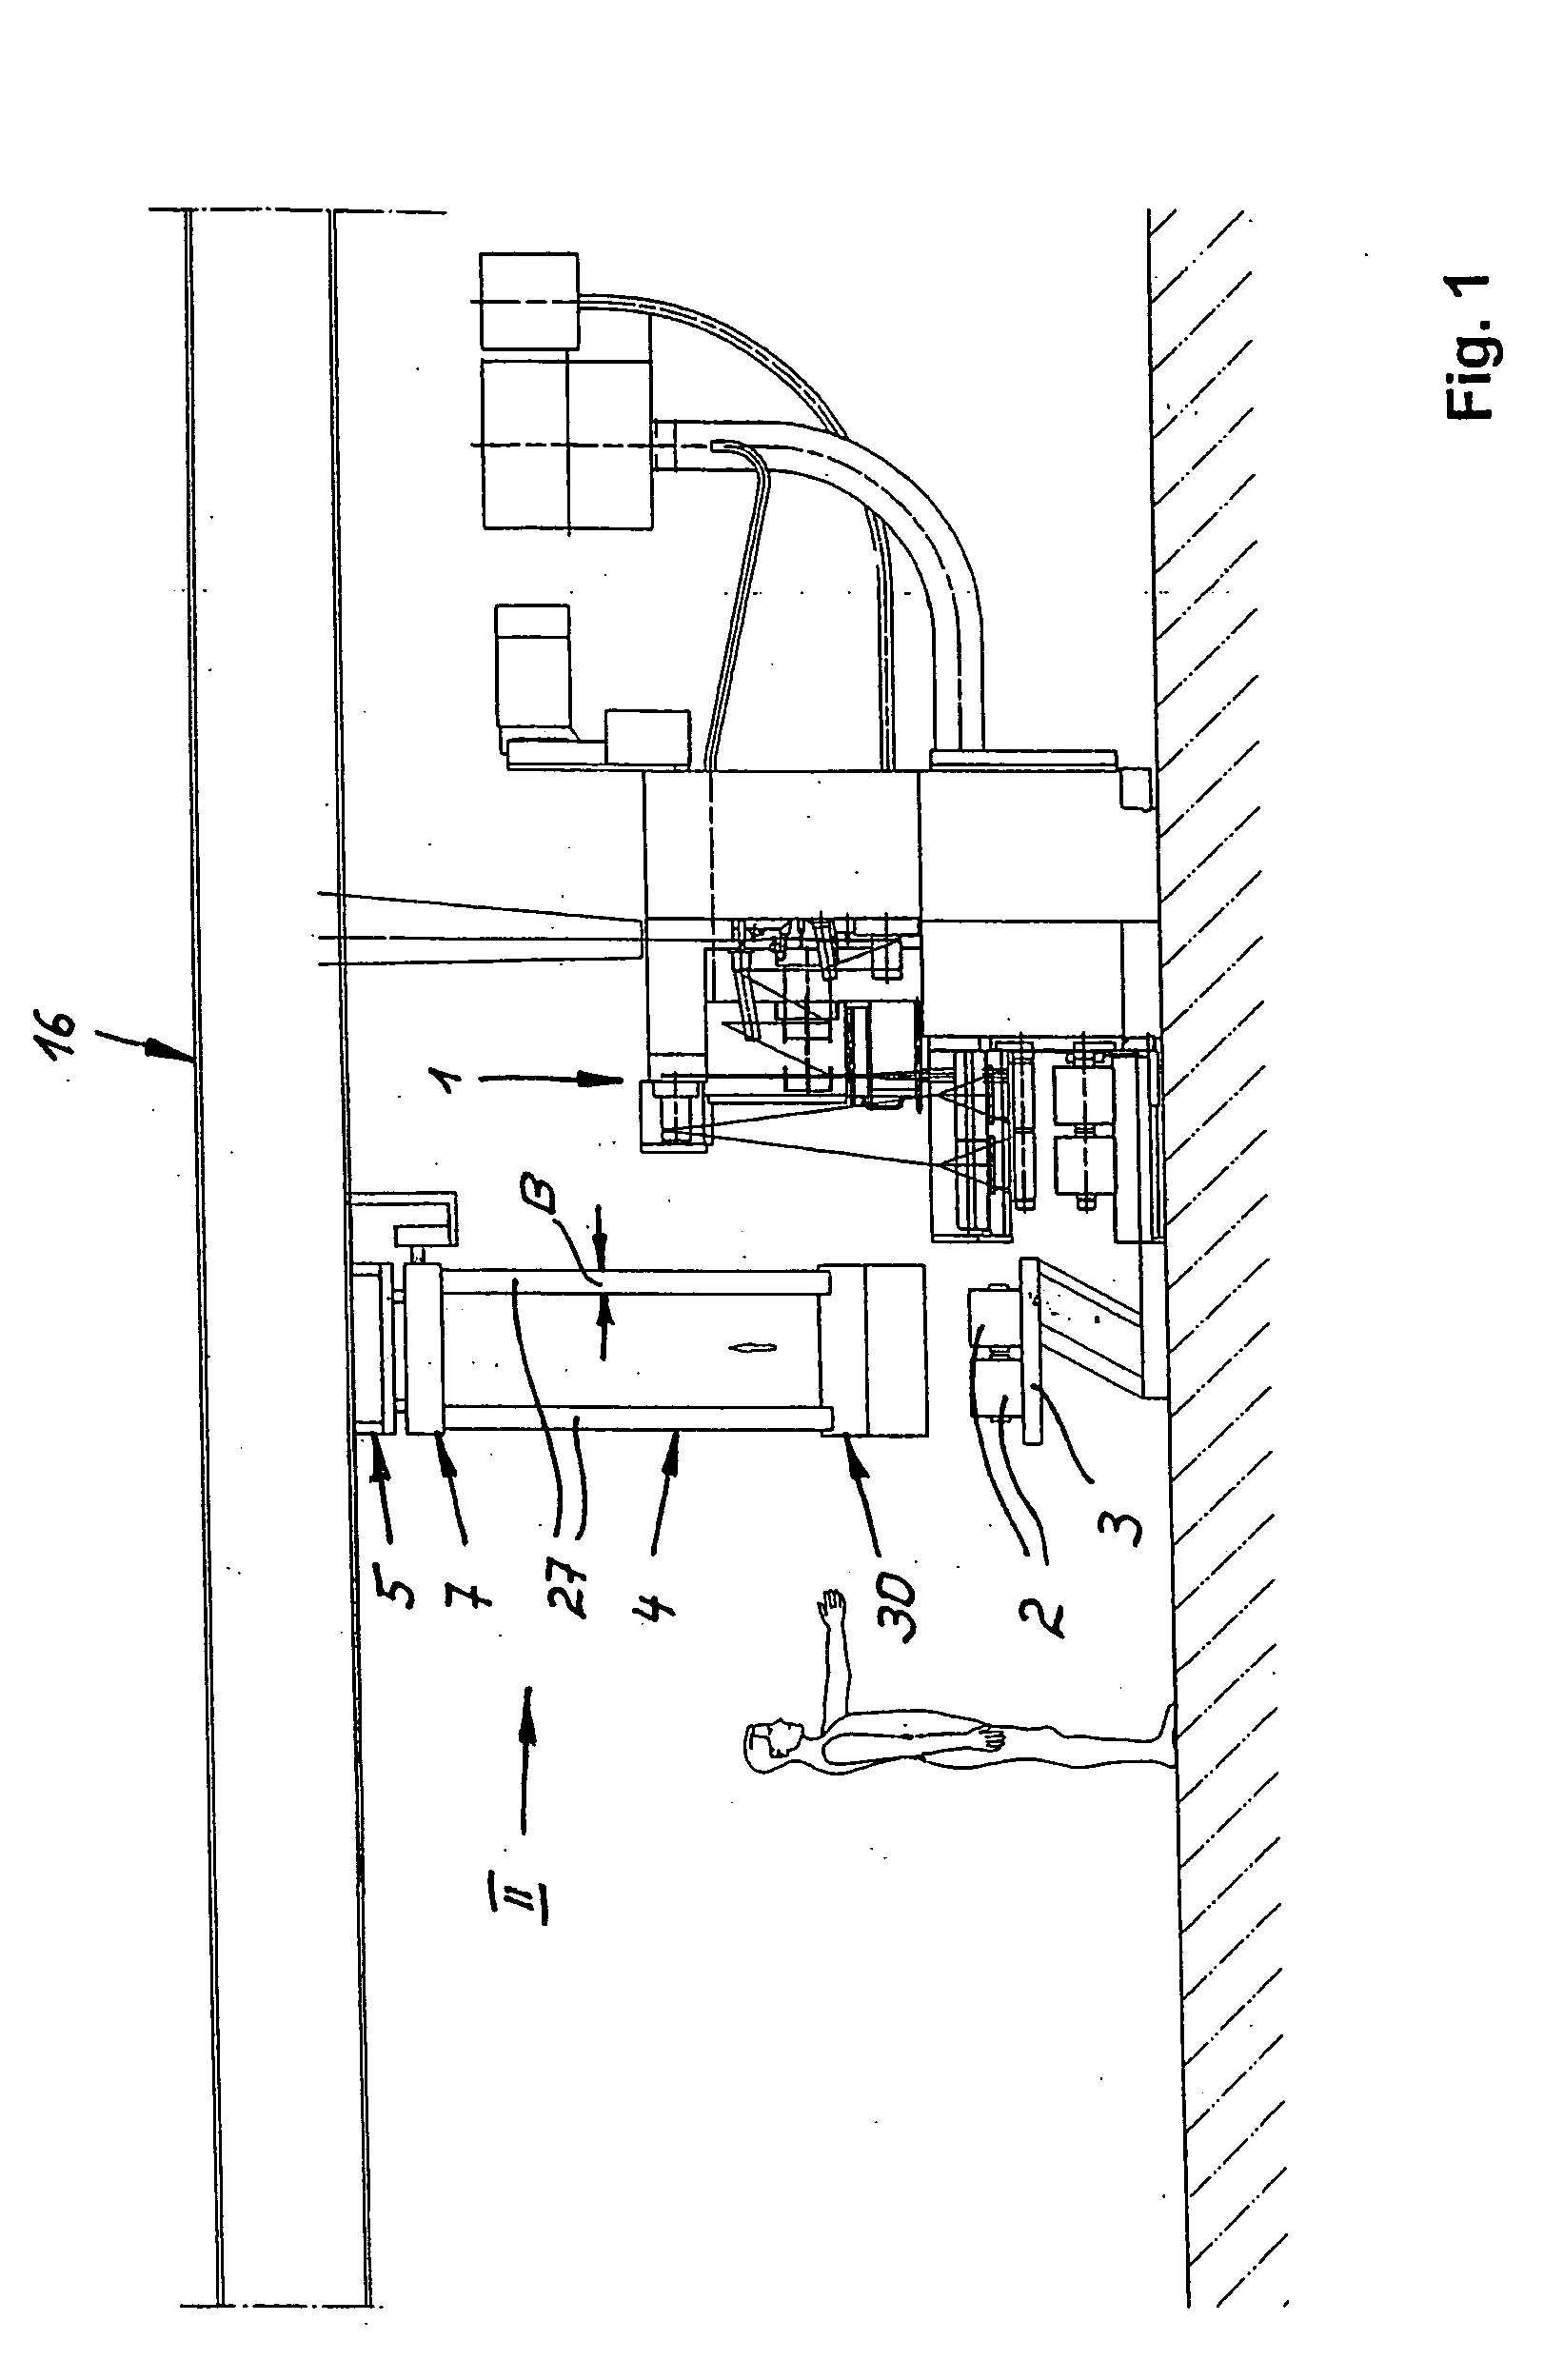 Transport apparatus for removal of bobbins